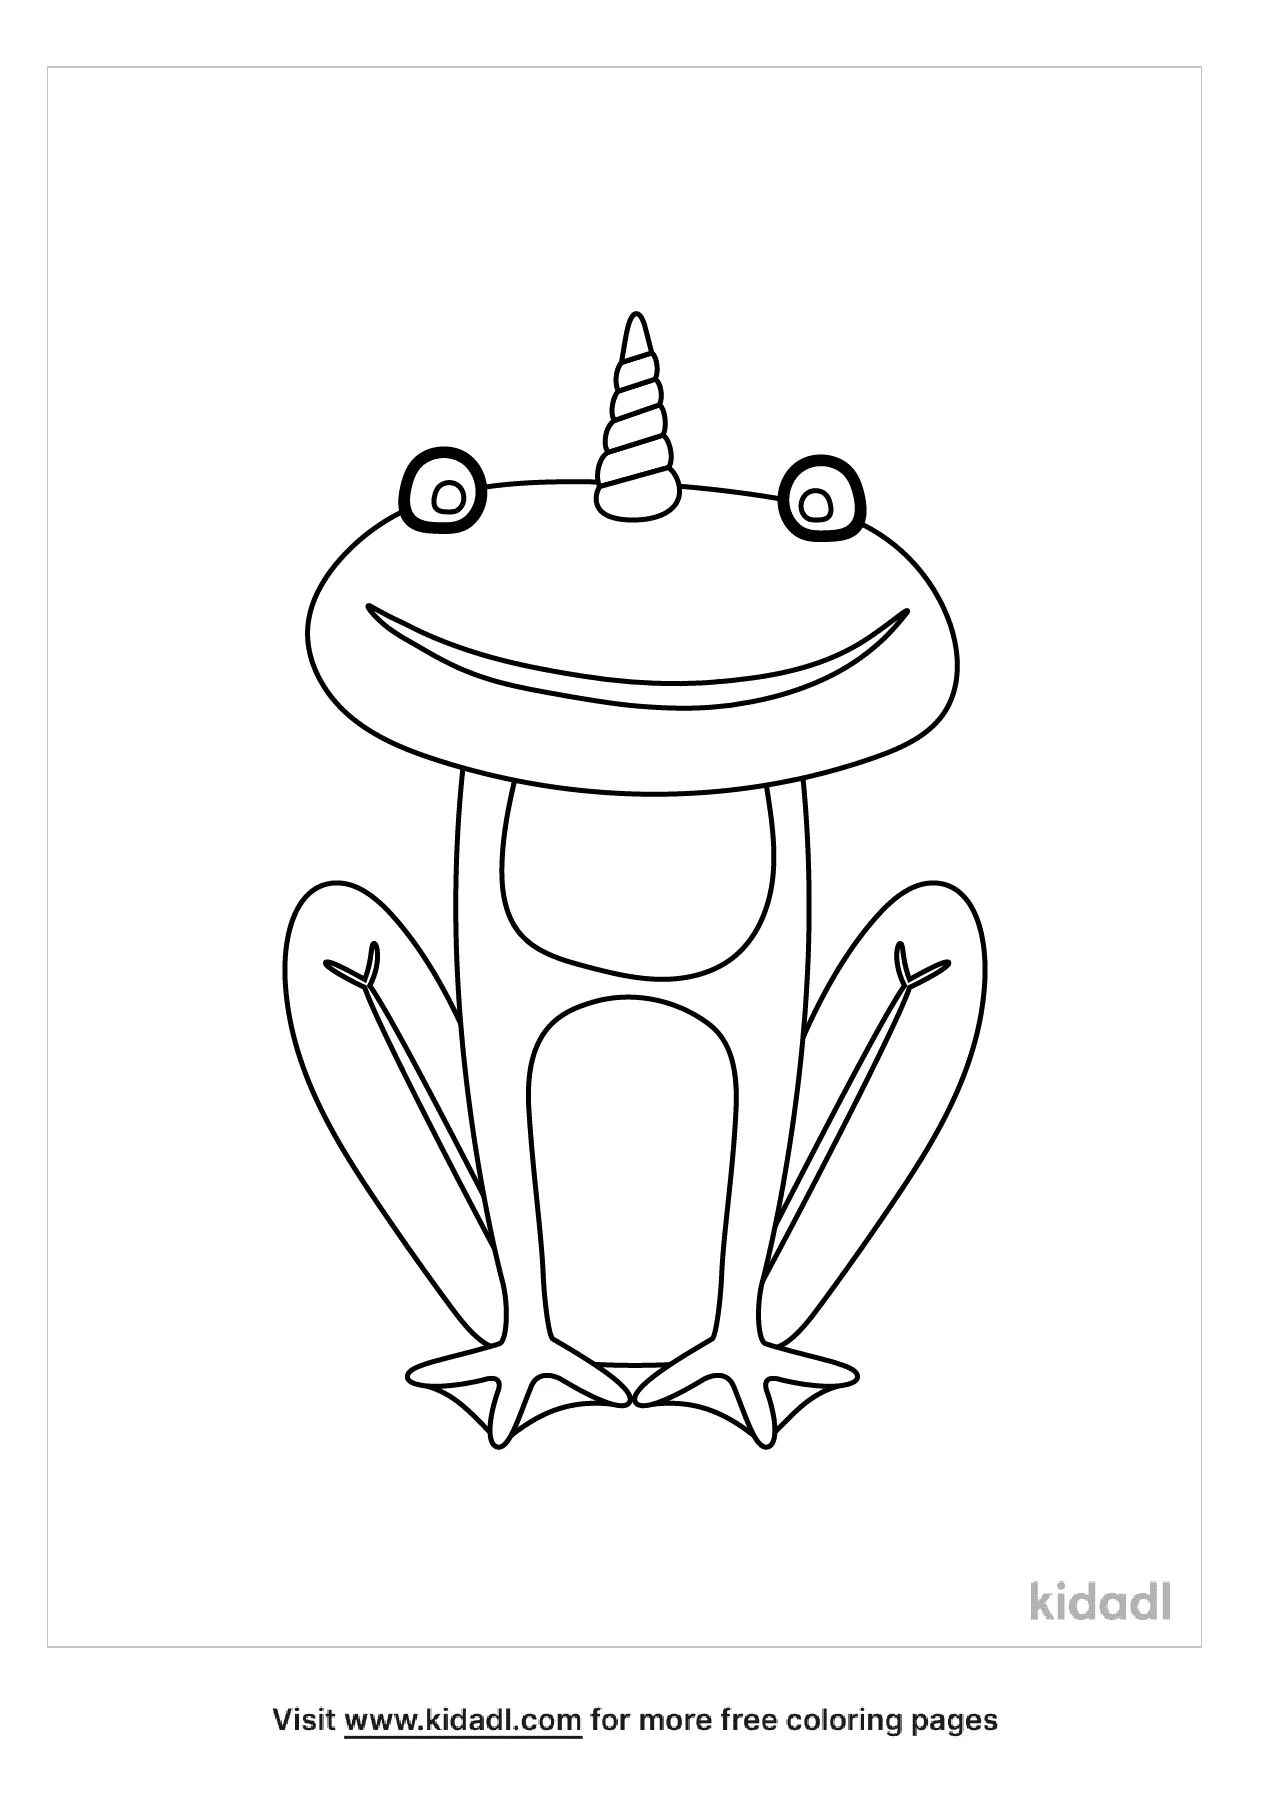 Unicorn Frog Coloring Page